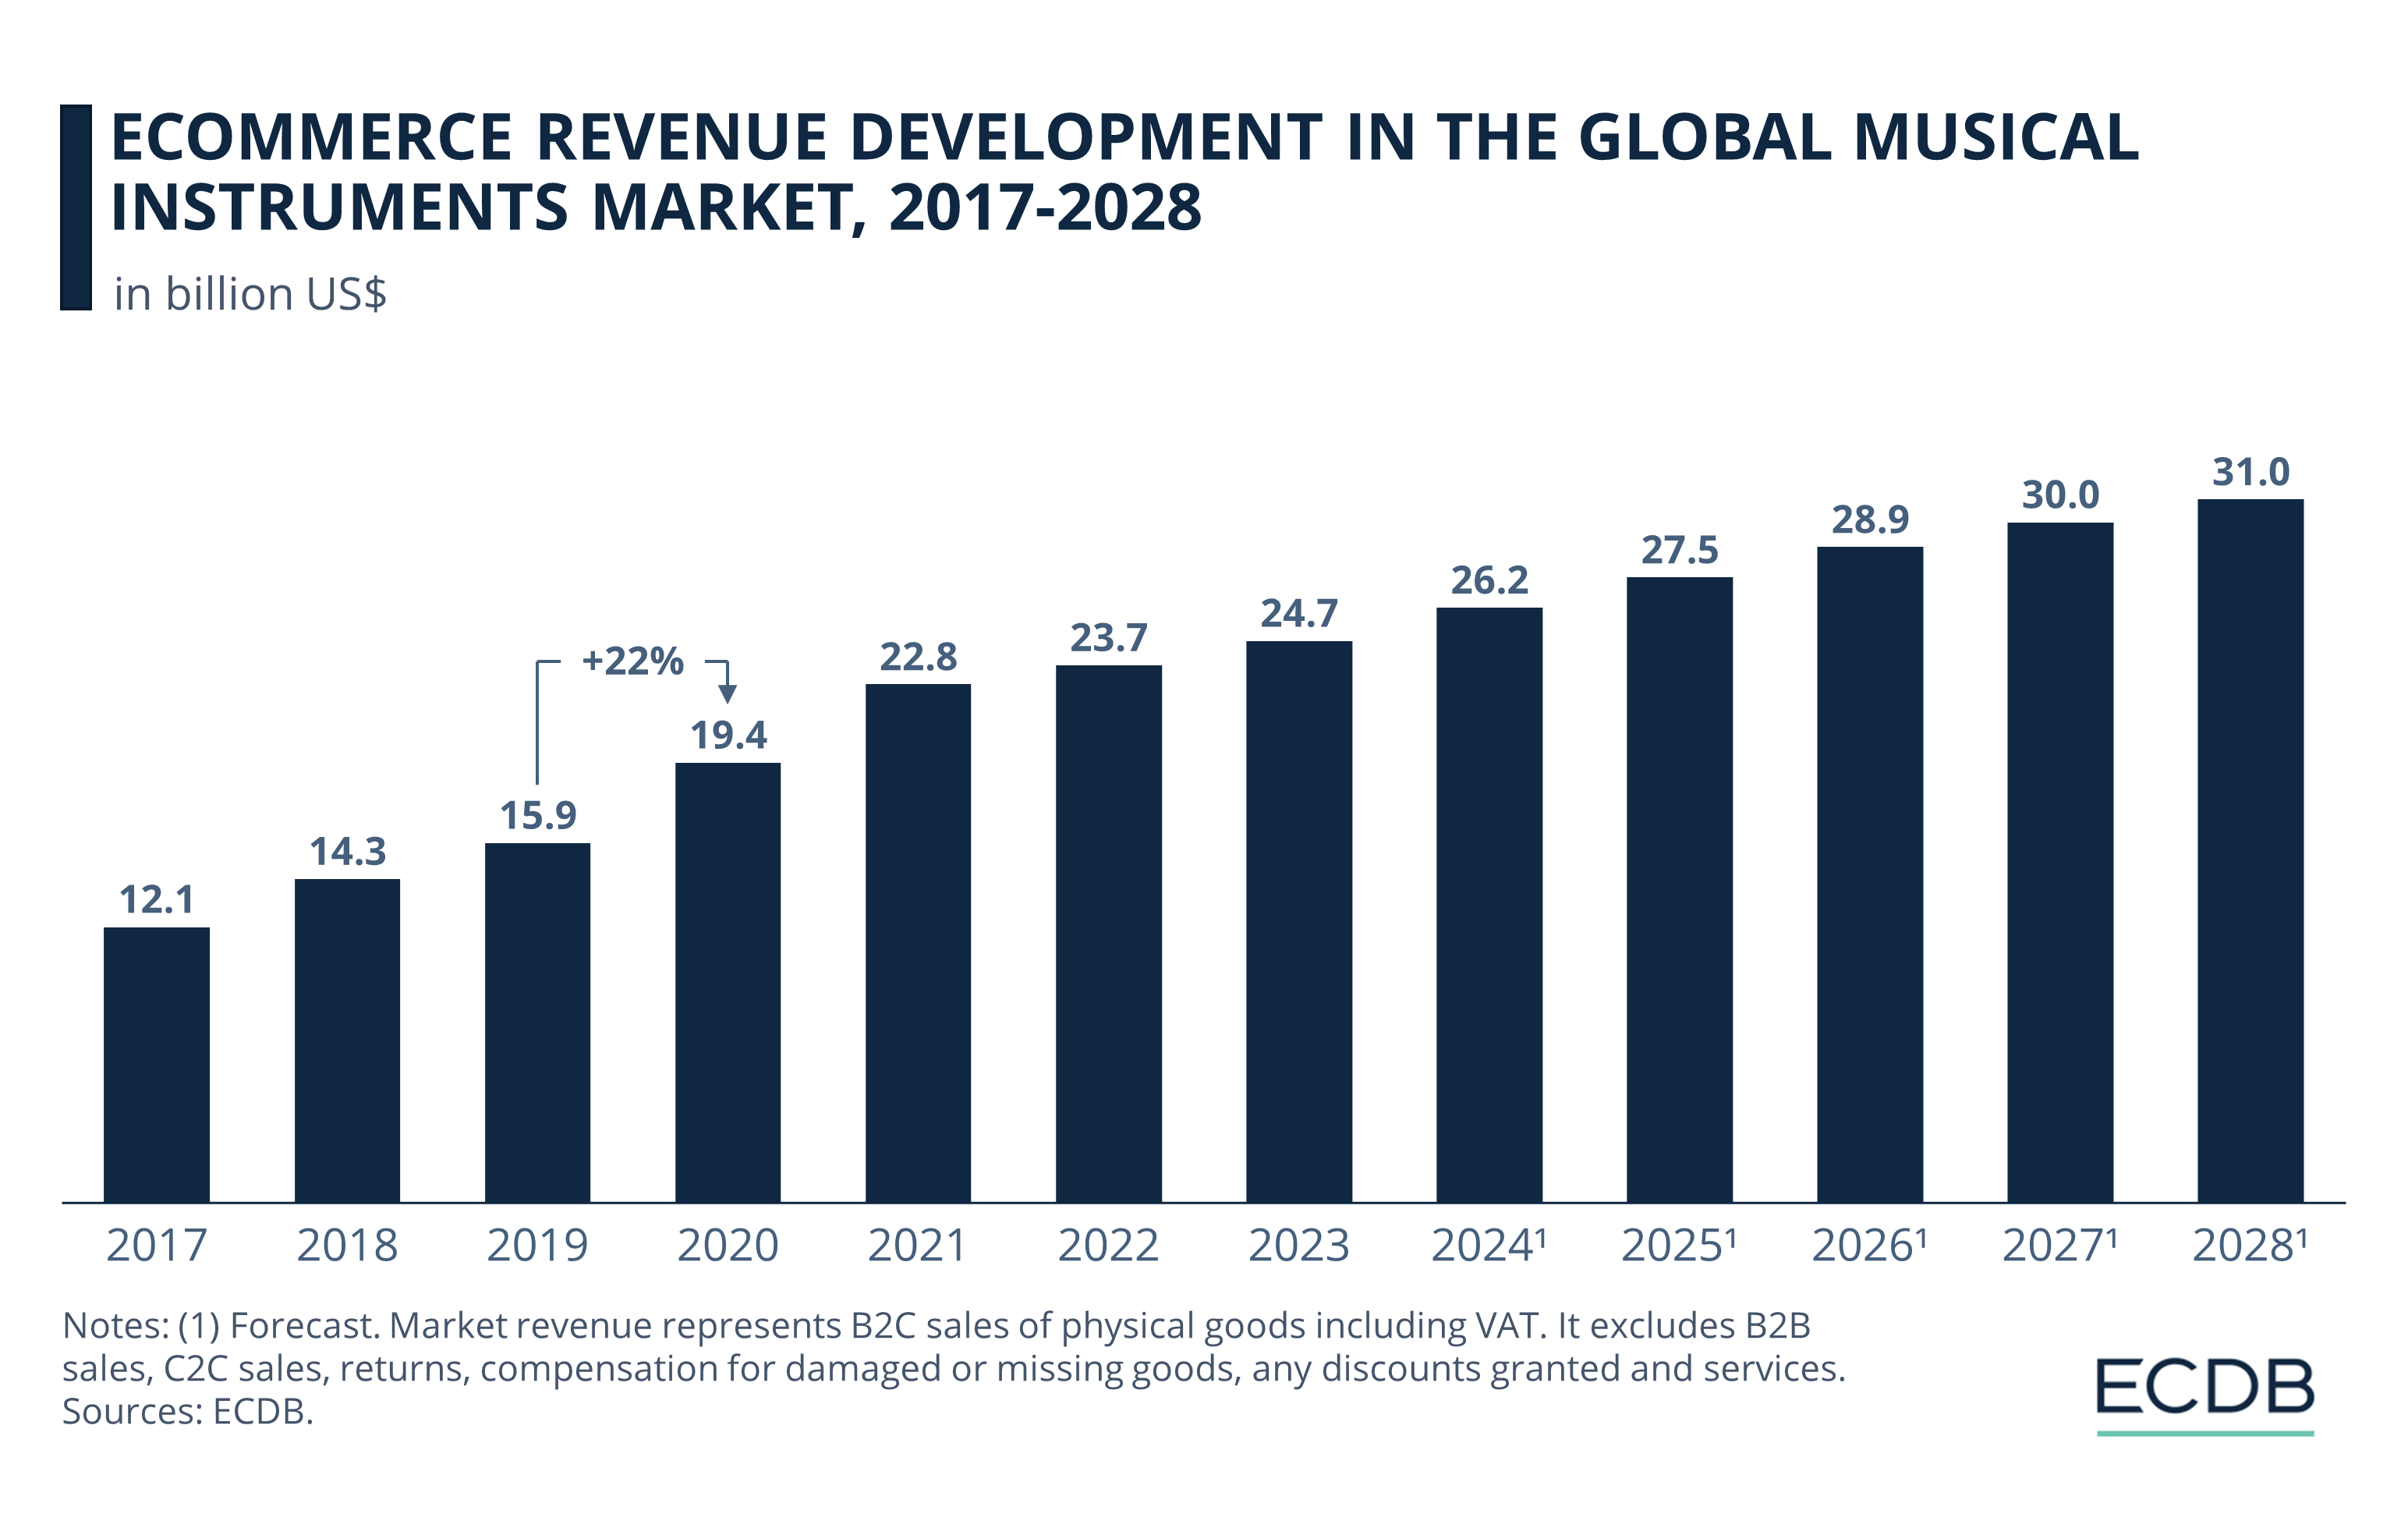 eCommerce Revenue Development in the Global Musical Instruments Market, 2017-2028